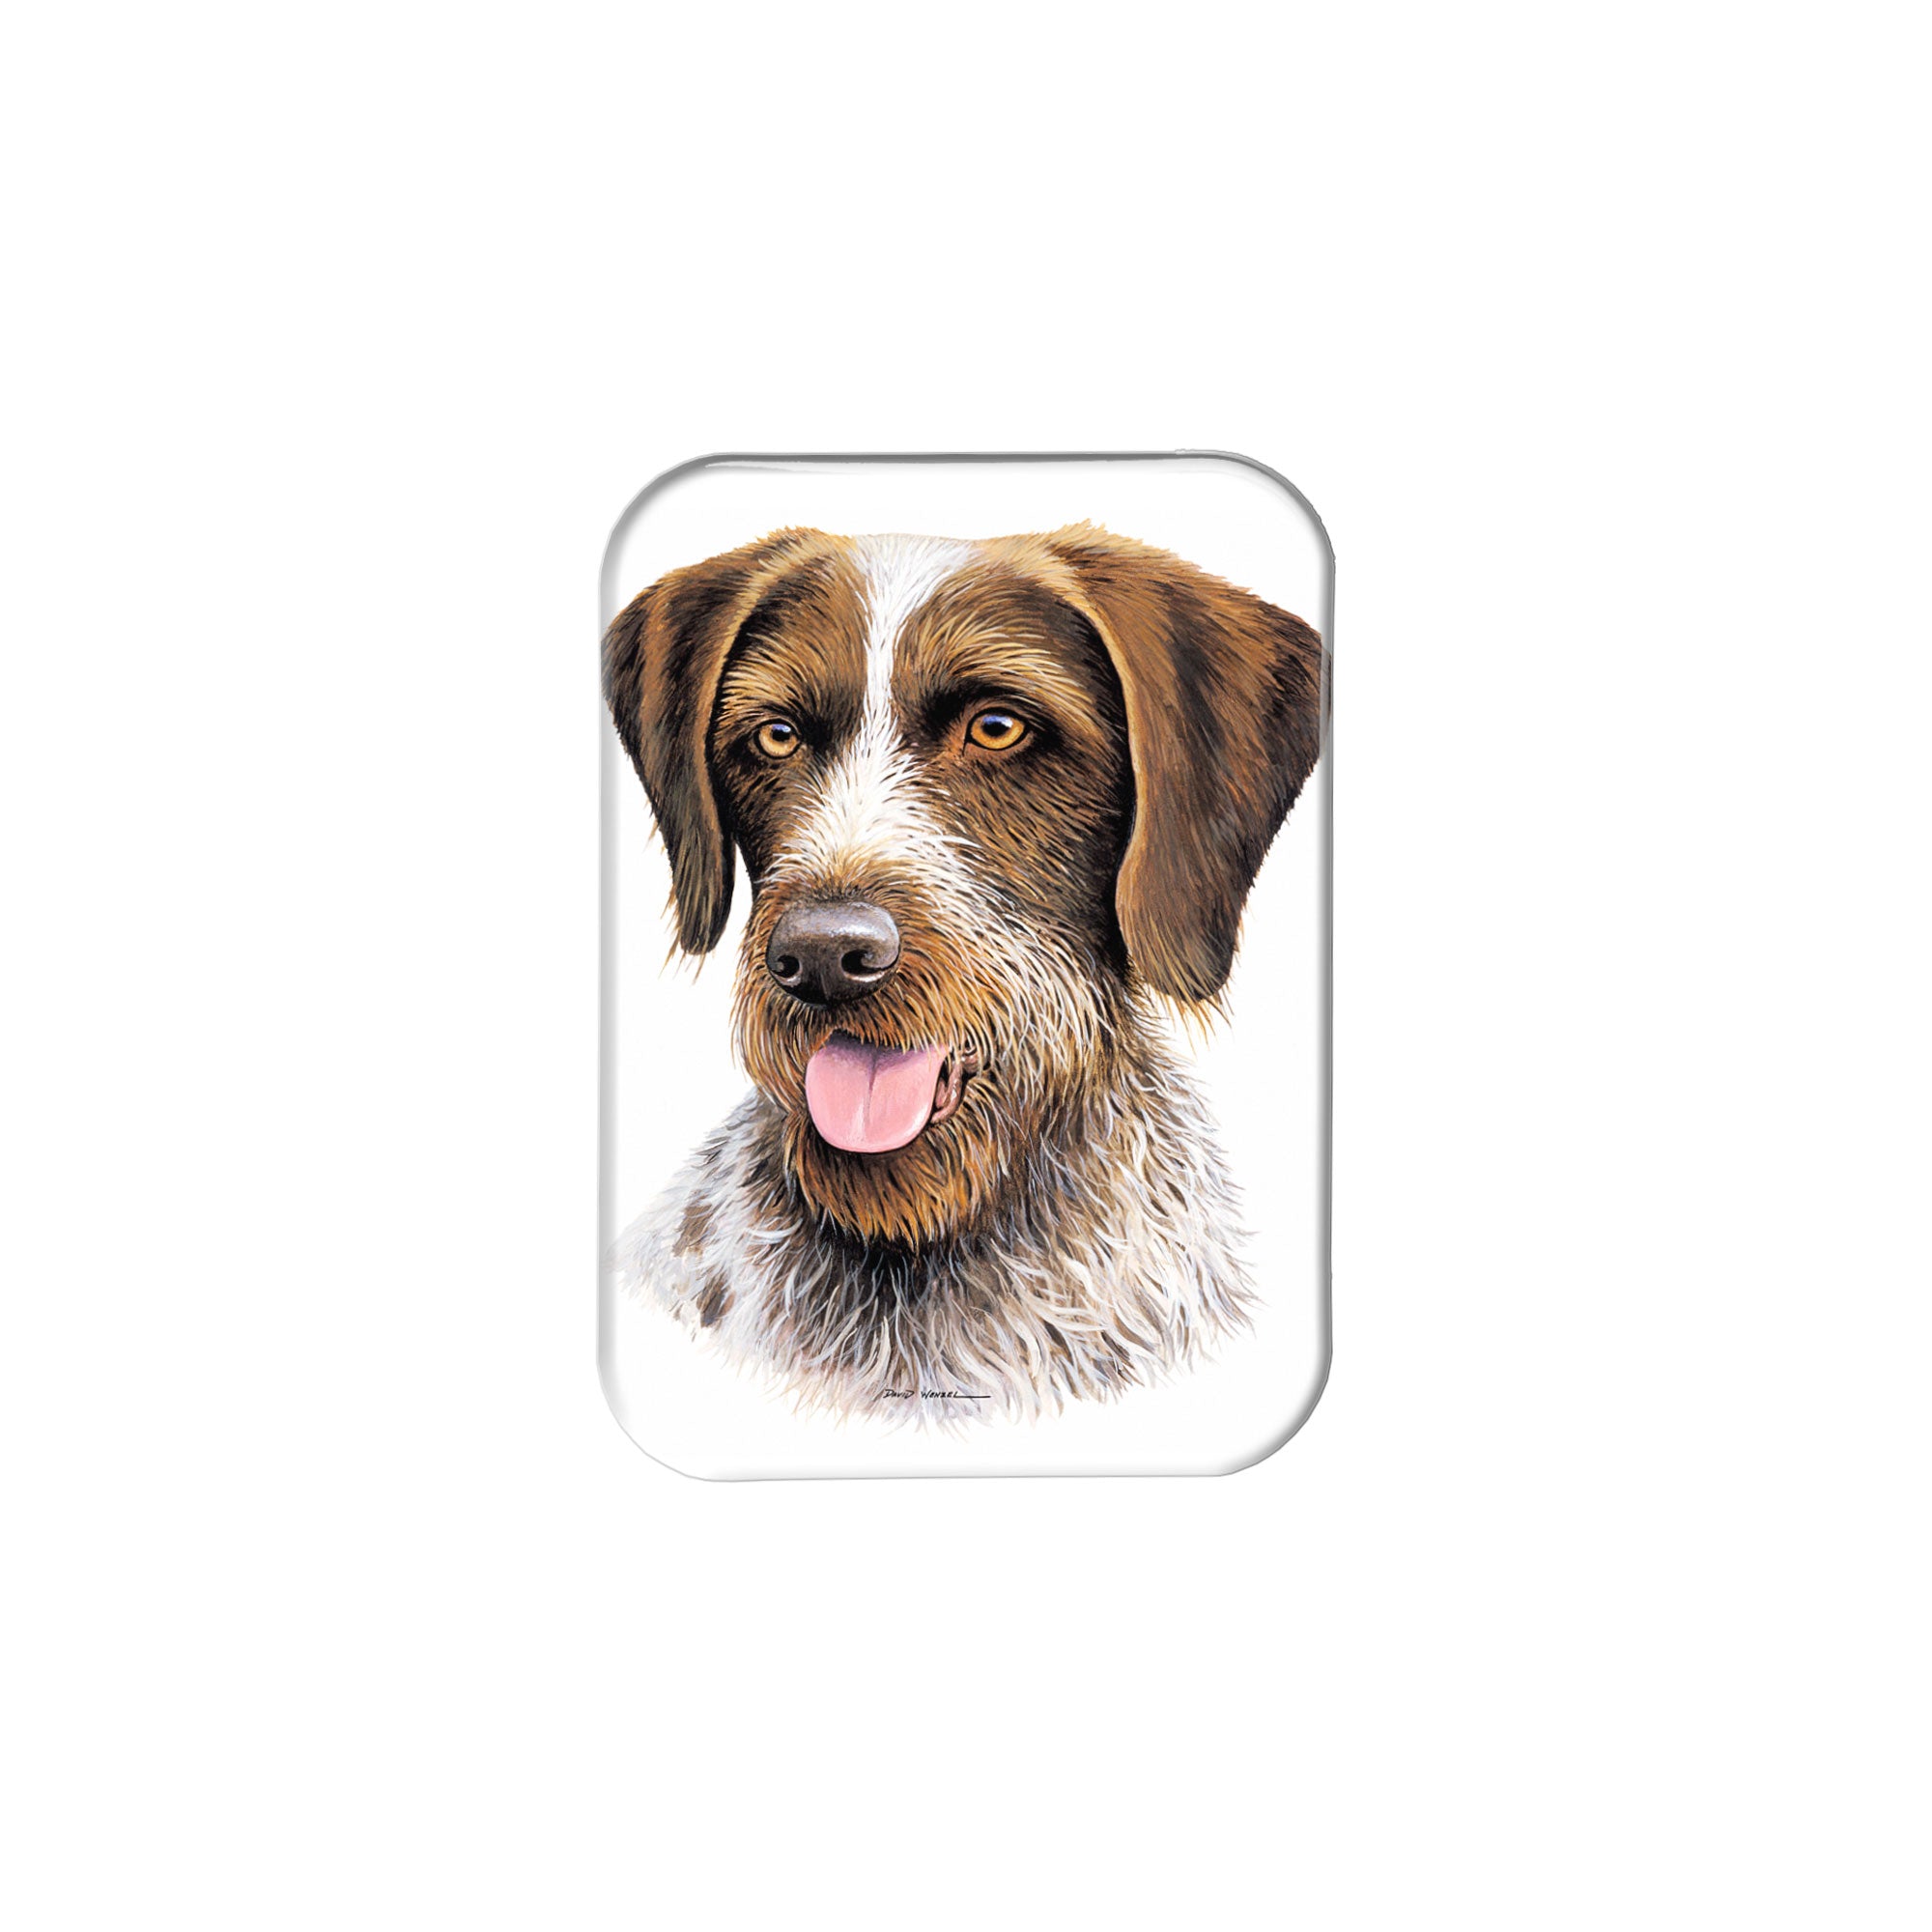 "German Wirehaired Pointer" - 2.5" X 3.5" Rectangle Fridge Magnets